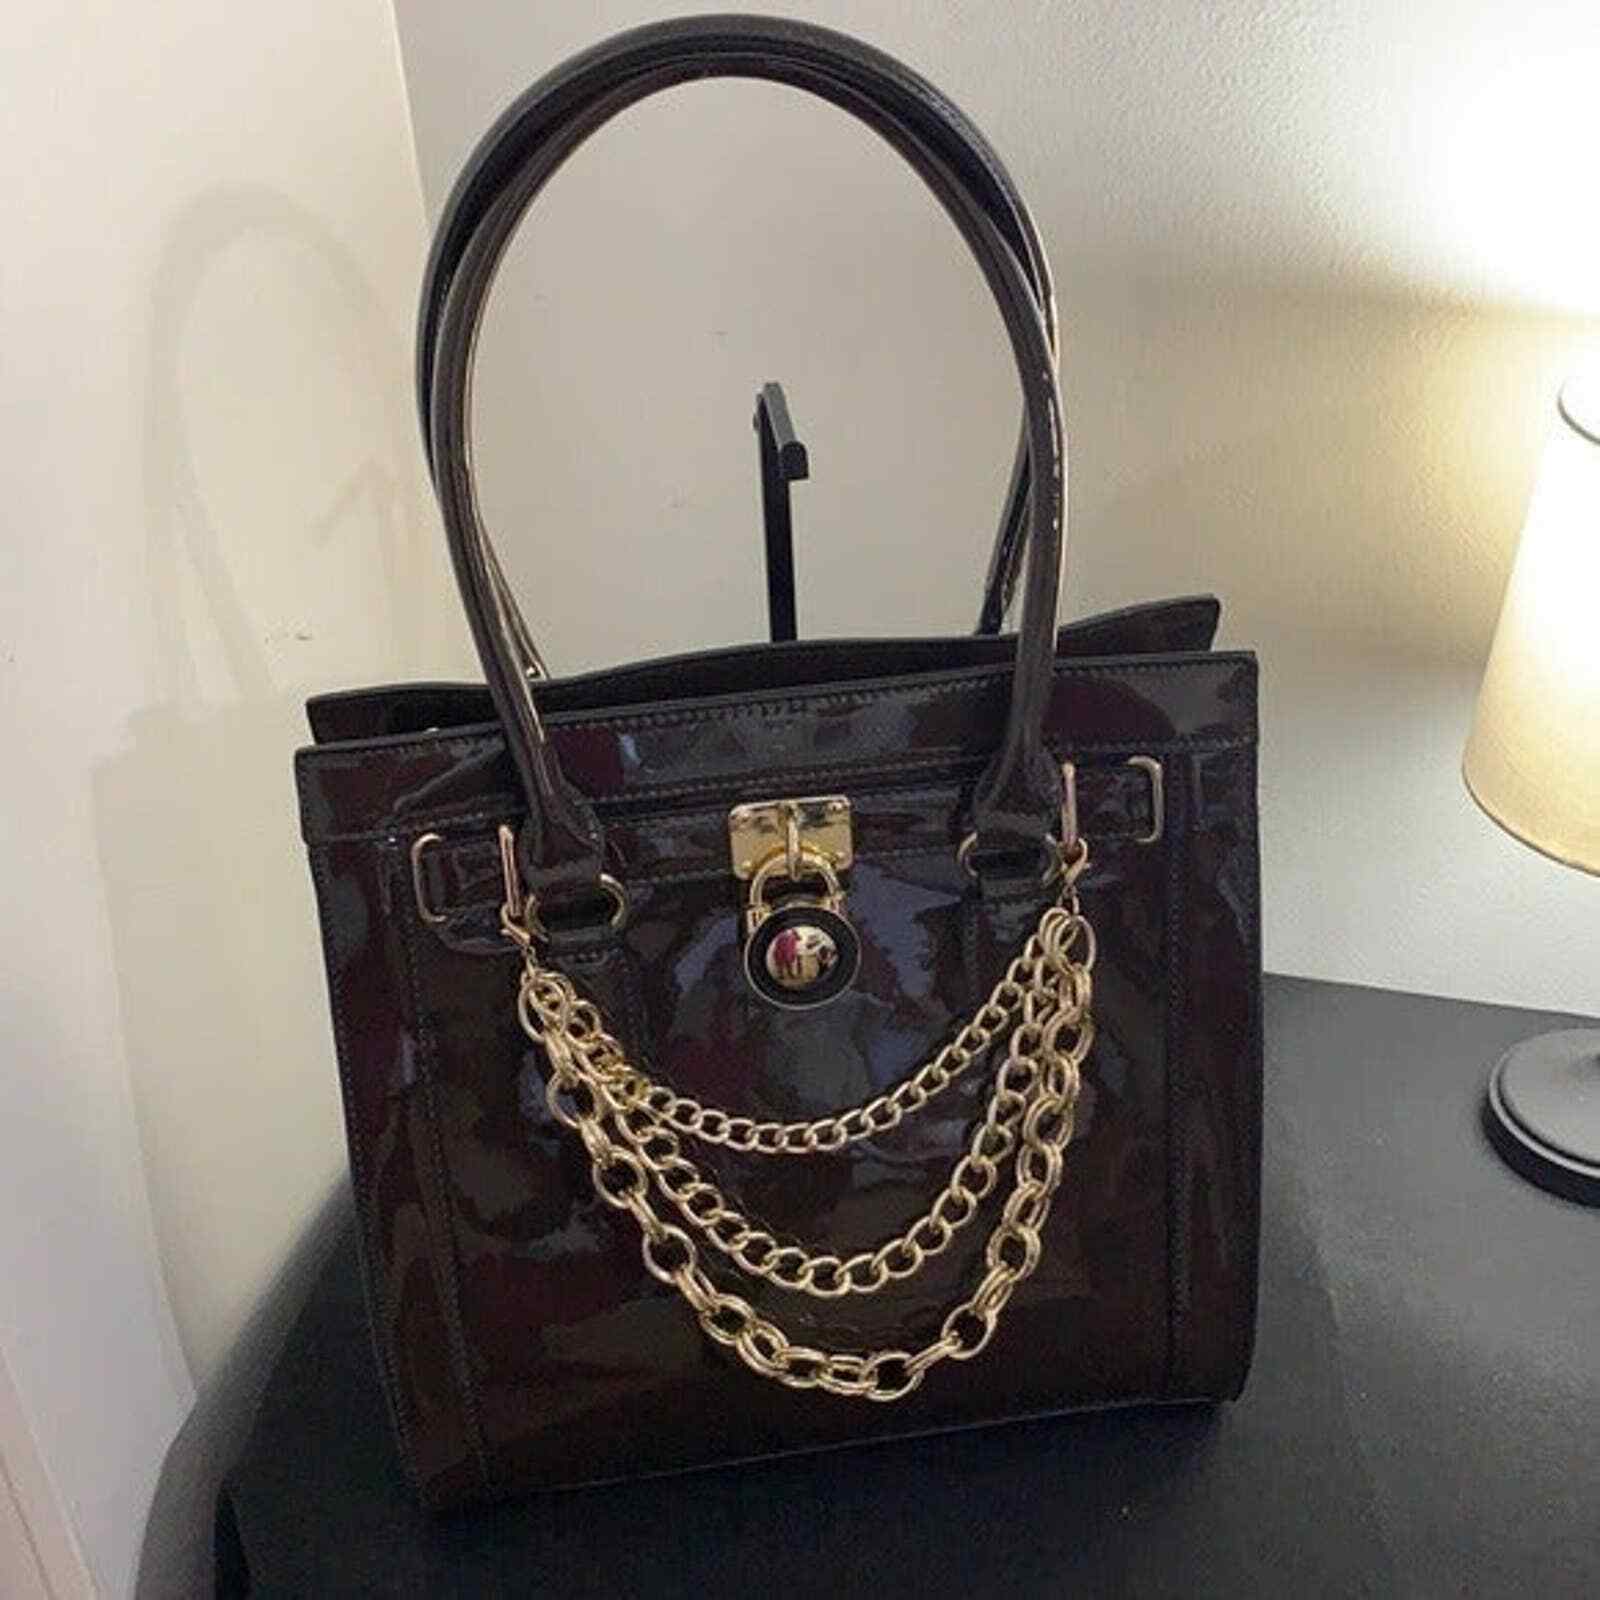 Caramelo Brown Patent Faux Leather Handbag